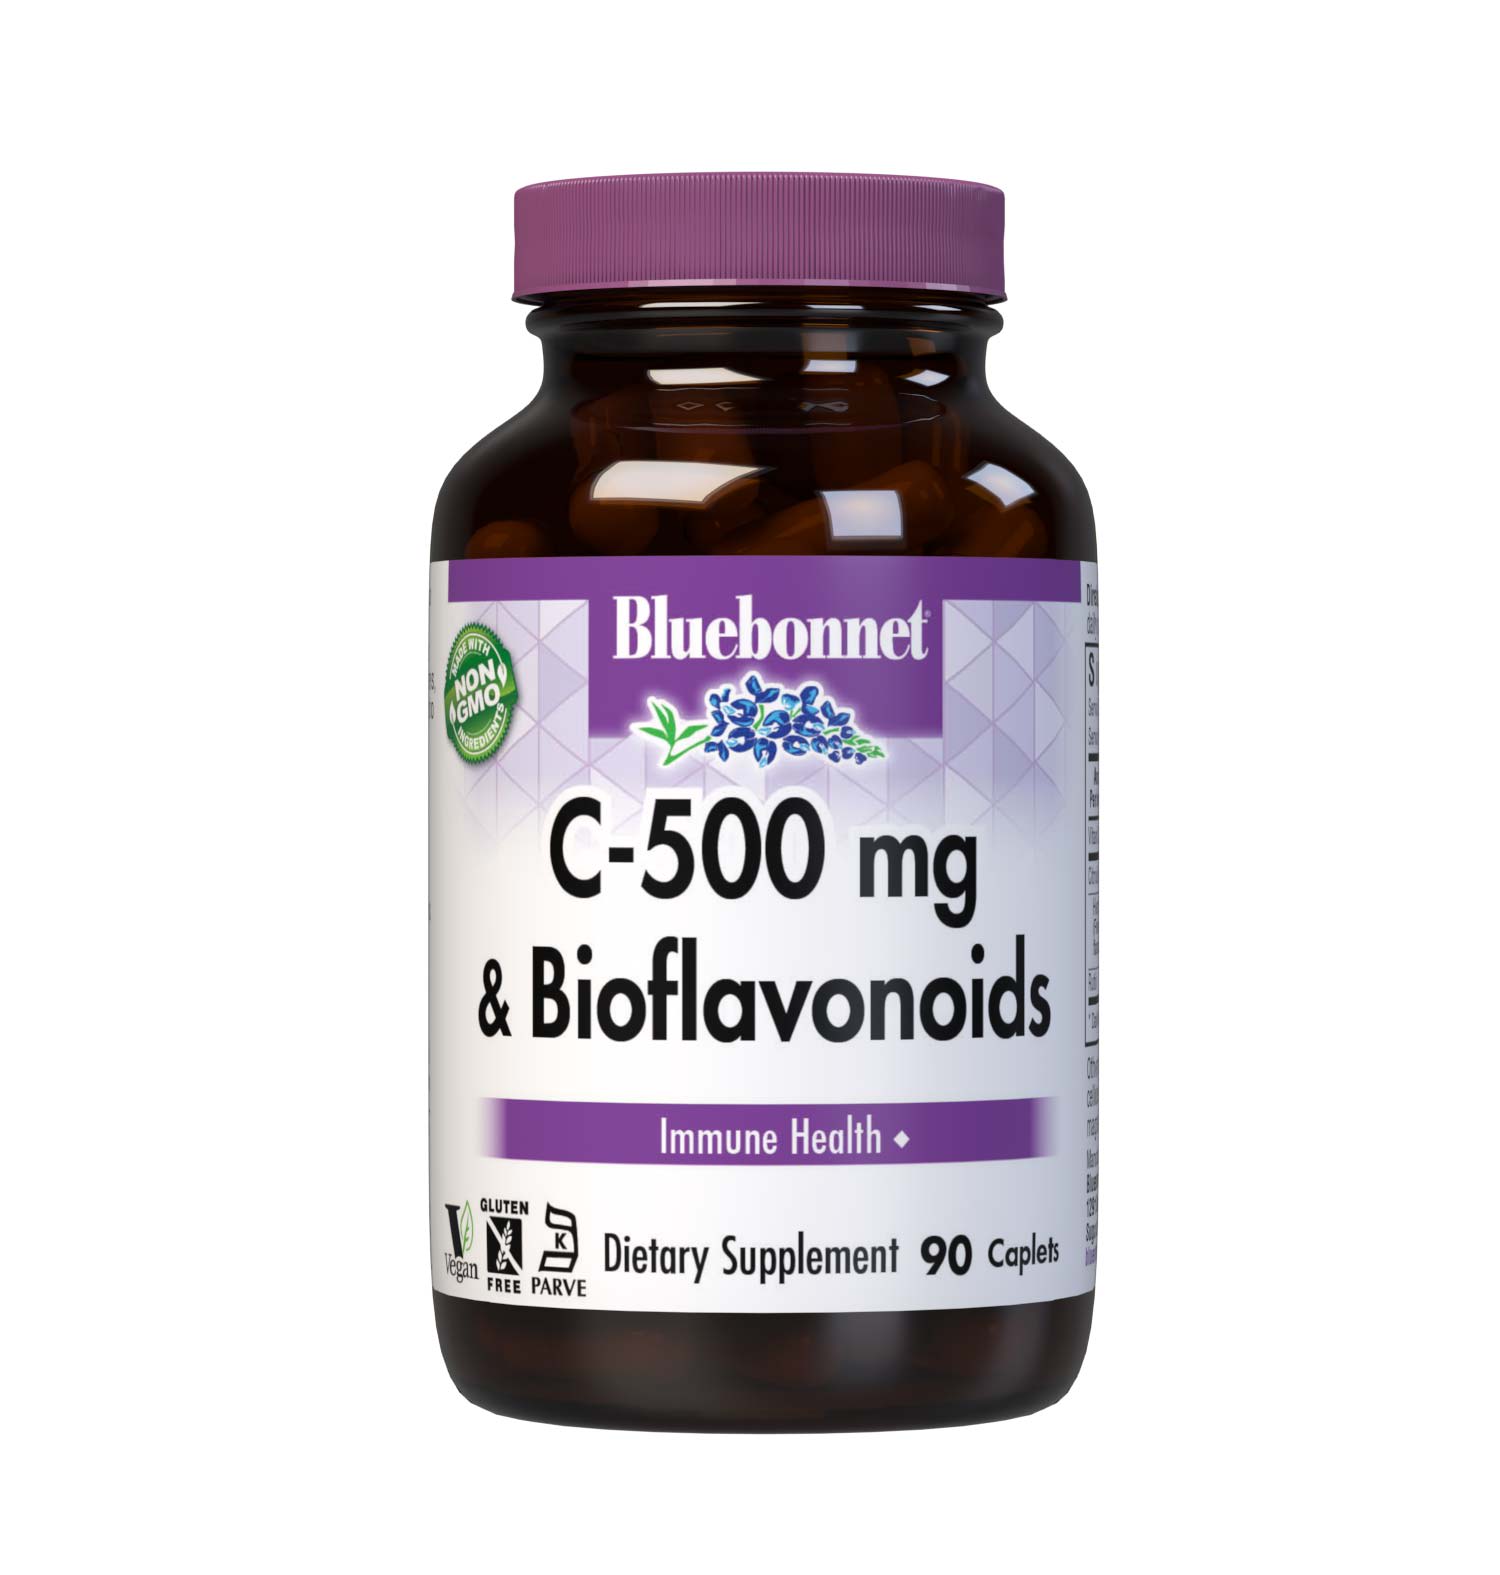 Bluebonnet’s C-500 mg & Bioflavonoids 90 Caplets are formulated with vitamin C from L-ascorbic acid that is (IP) identity-preserved and non-GMO with citrus bioflavonoids from oranges, lemons, tangerines, grapefruits and limes to help support immune health. #size_90 count